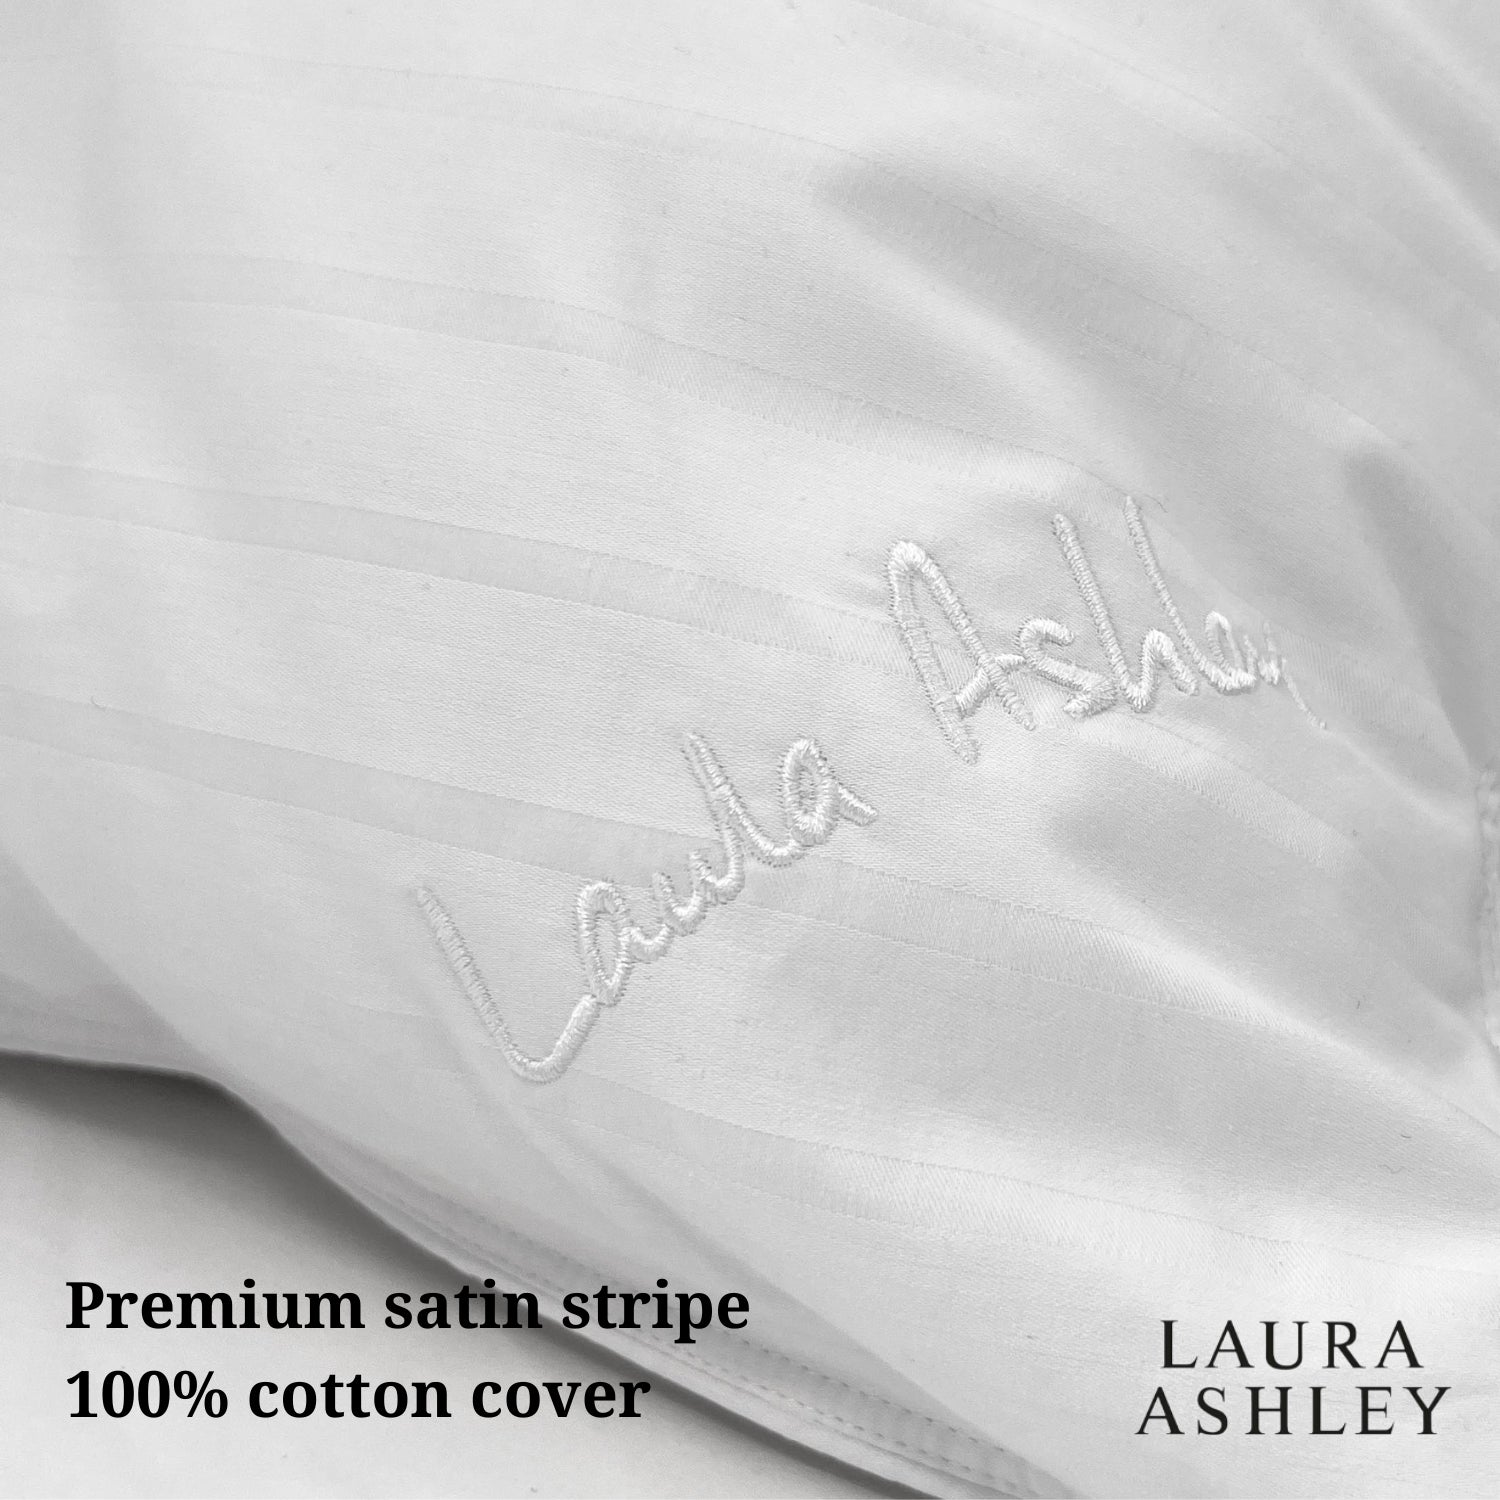 Laura Ashley Luxury Back Sleeper Pillow with luxury satin cover 